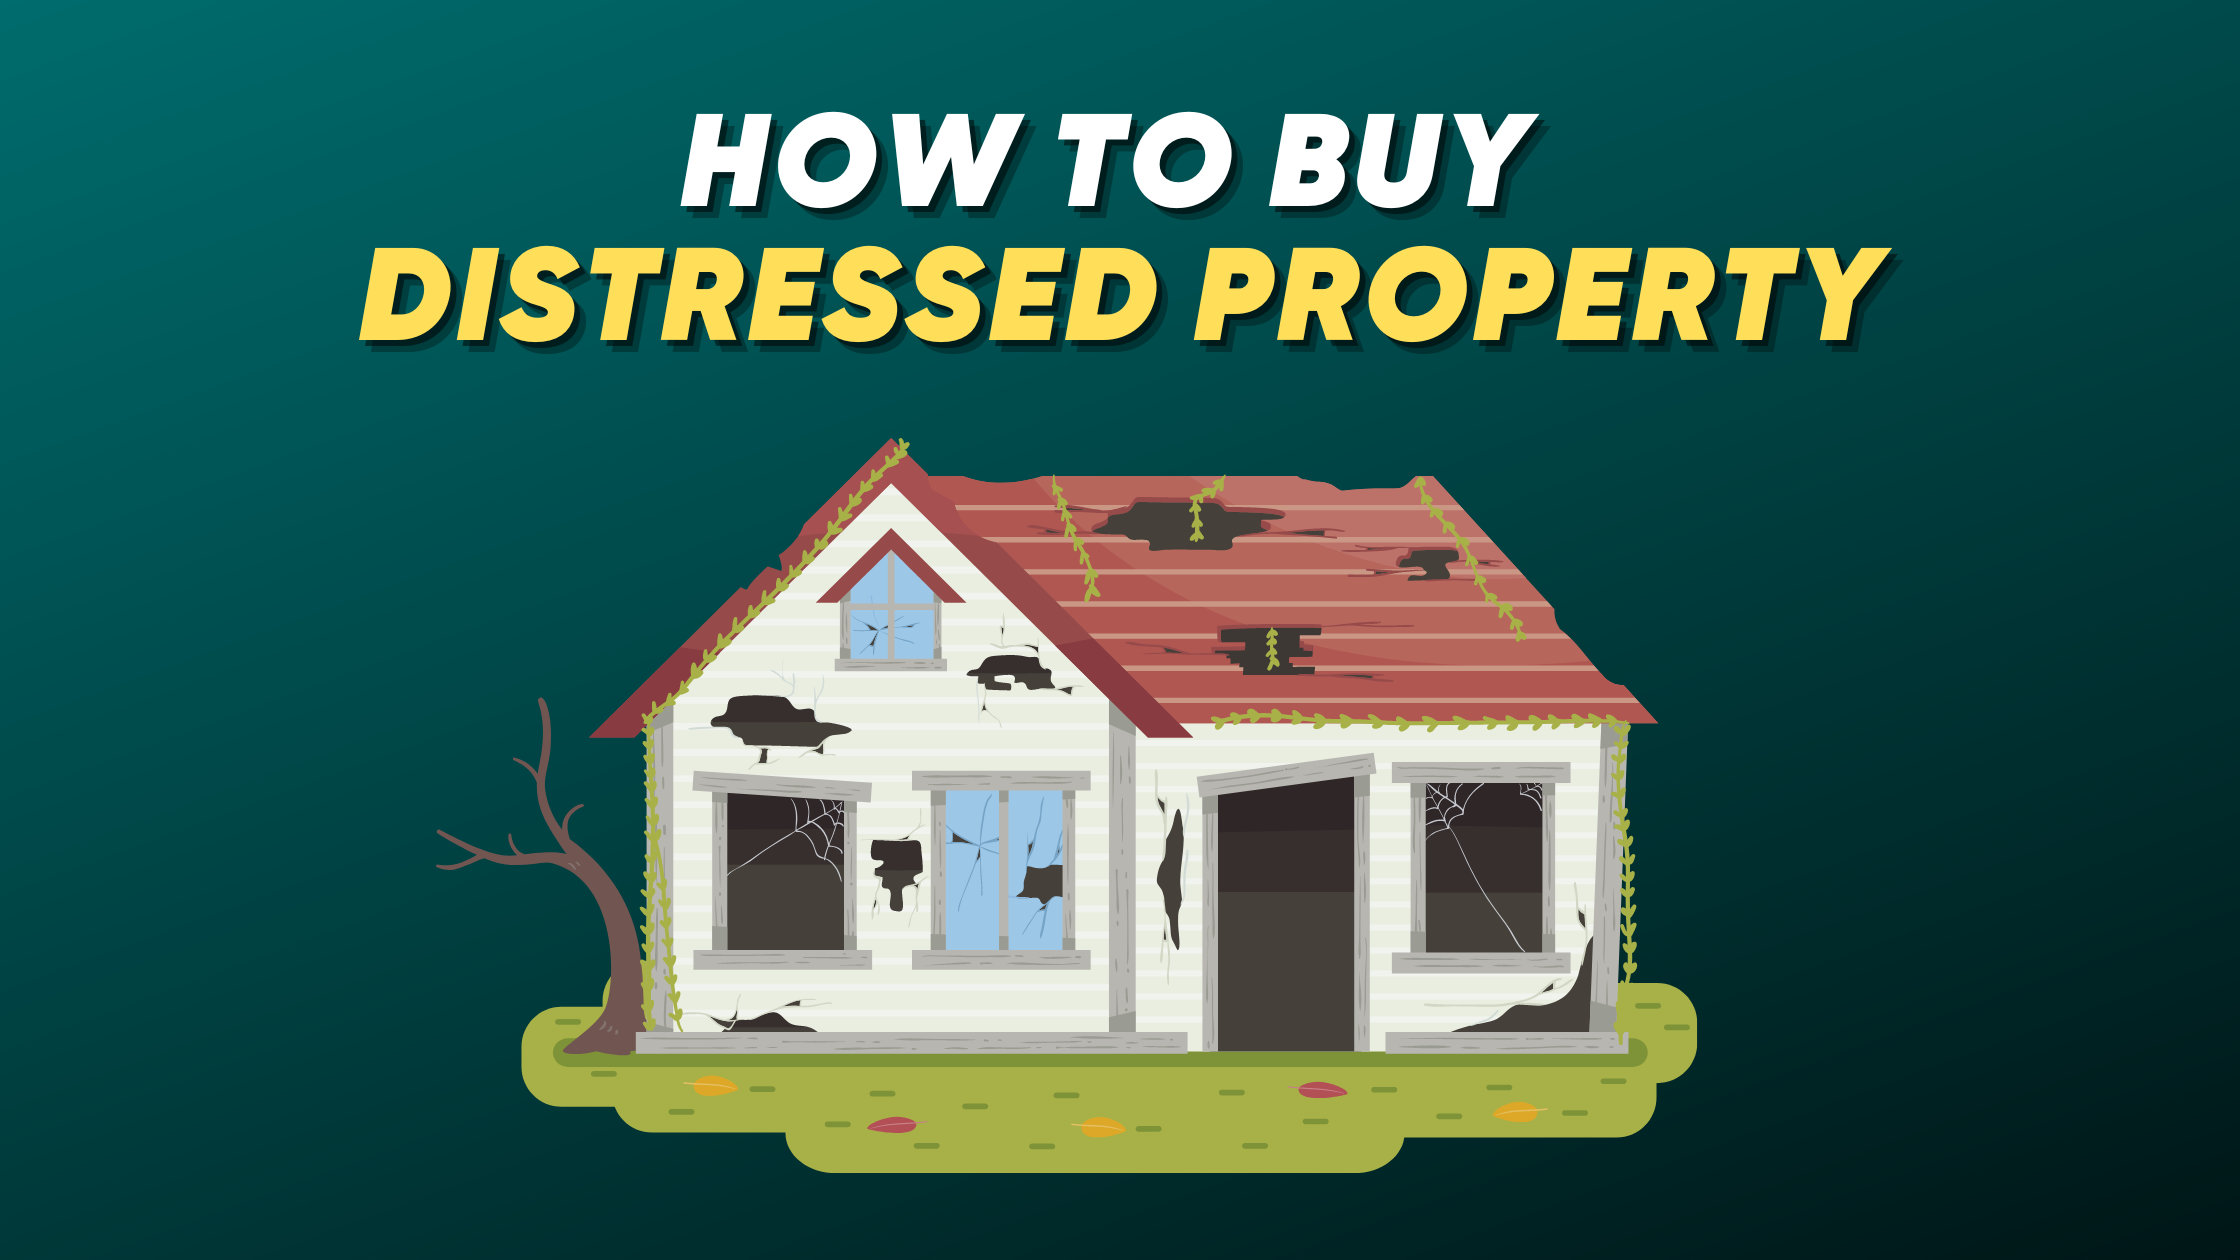 How To Buy Distressed Property